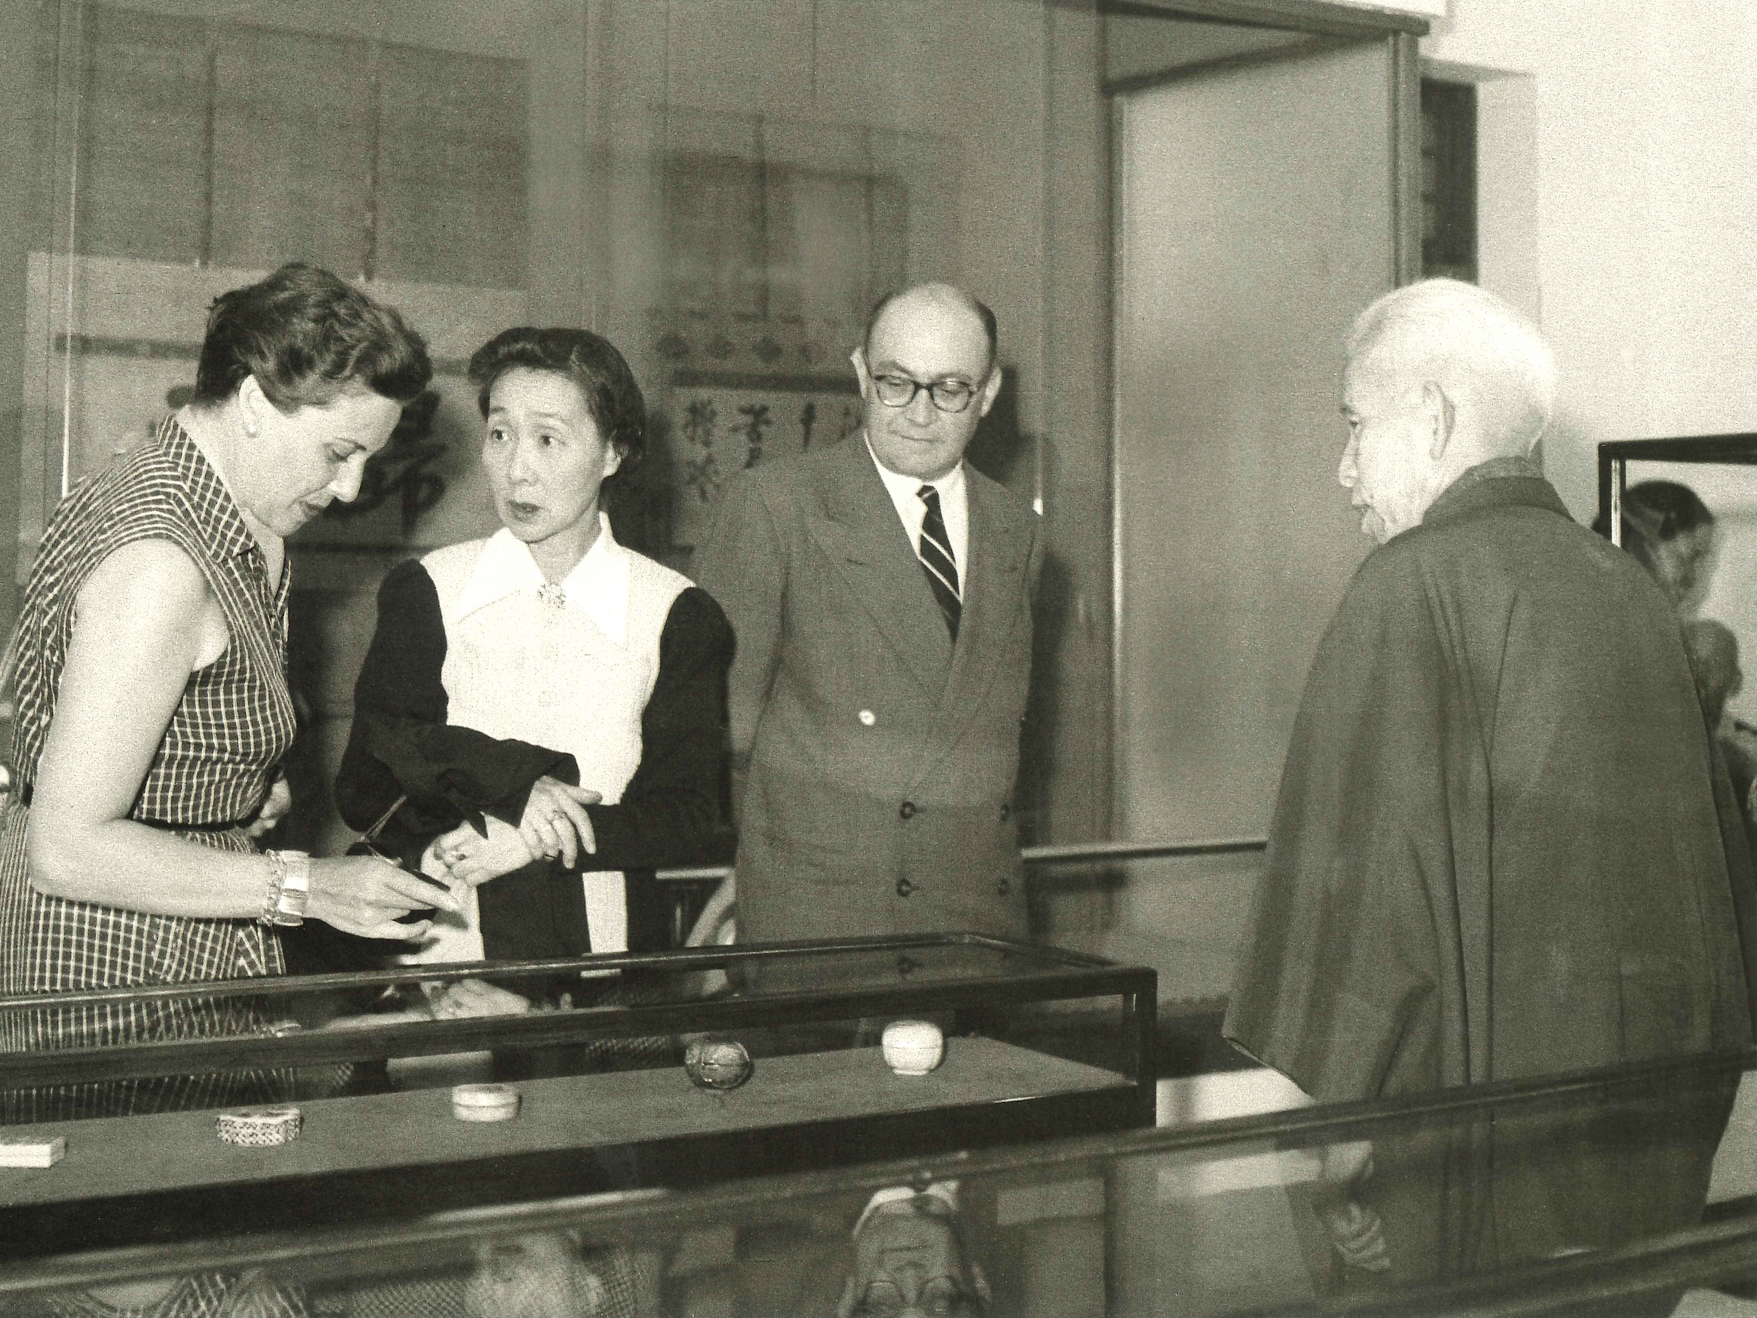 French magazine Paris Match’s chief editor, Raymond Cartier and his wife (June 22, 1952)